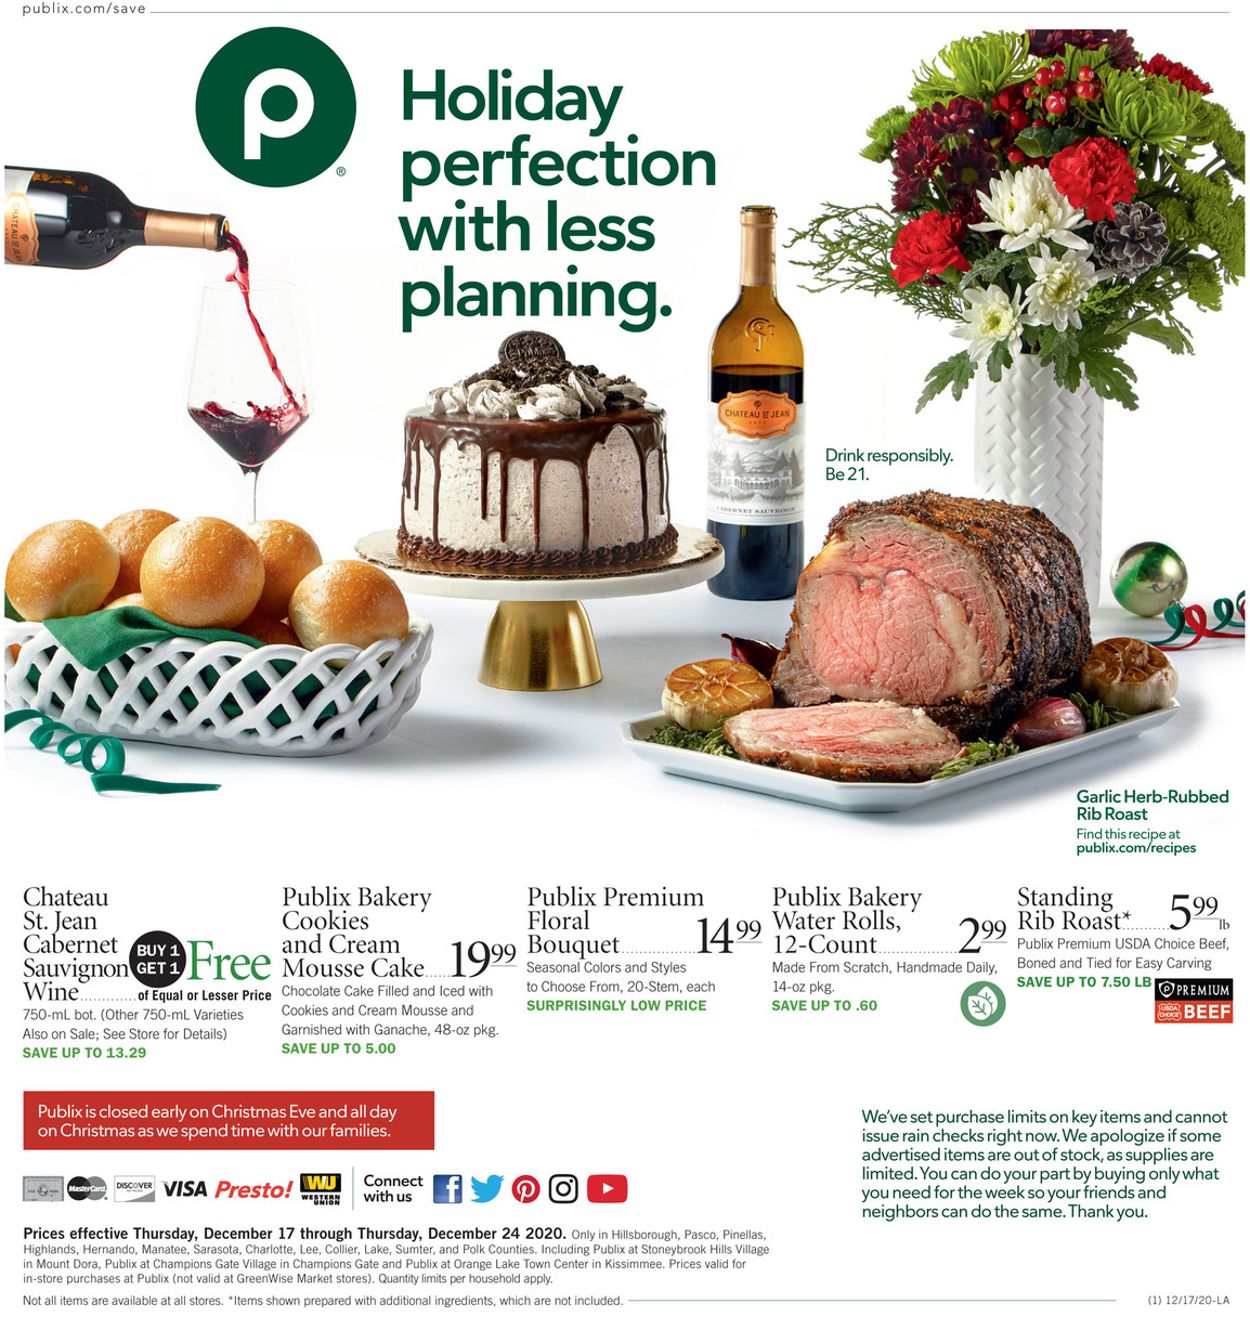 Publix Christmas Meal All the details on publix's holiday hours this